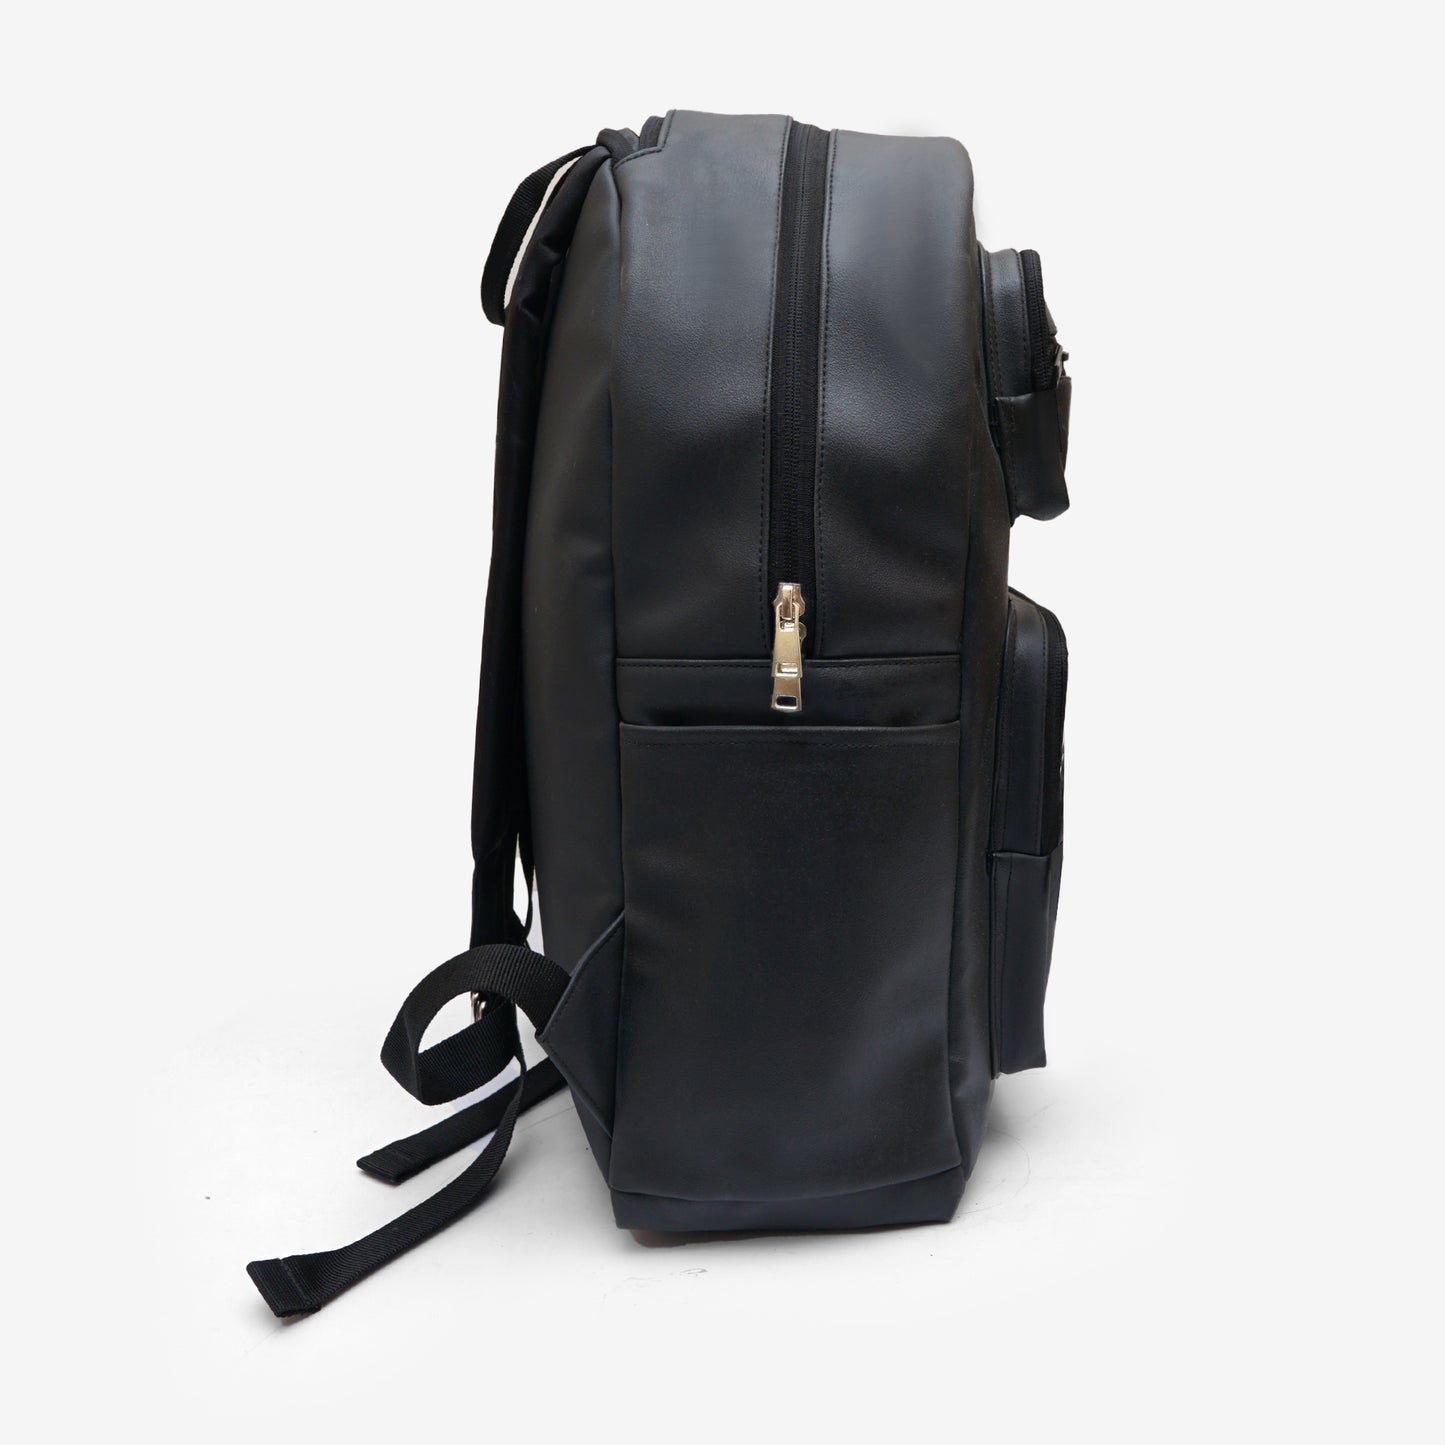 All day backpack – A tailor's son